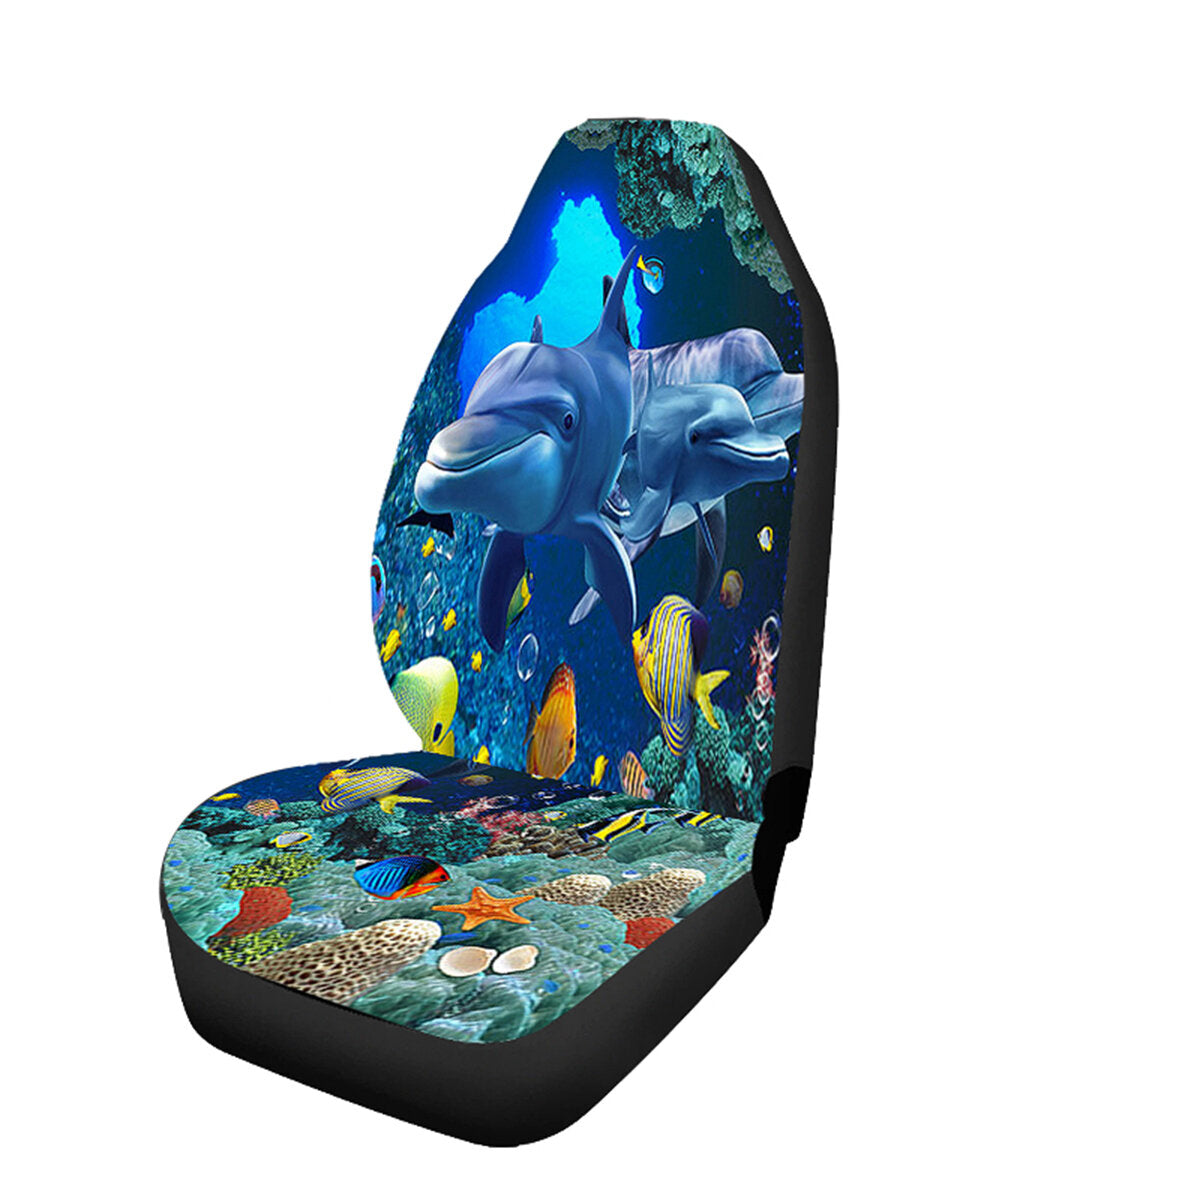 Car Seat Dolphin Universal Printed Cover Cushion